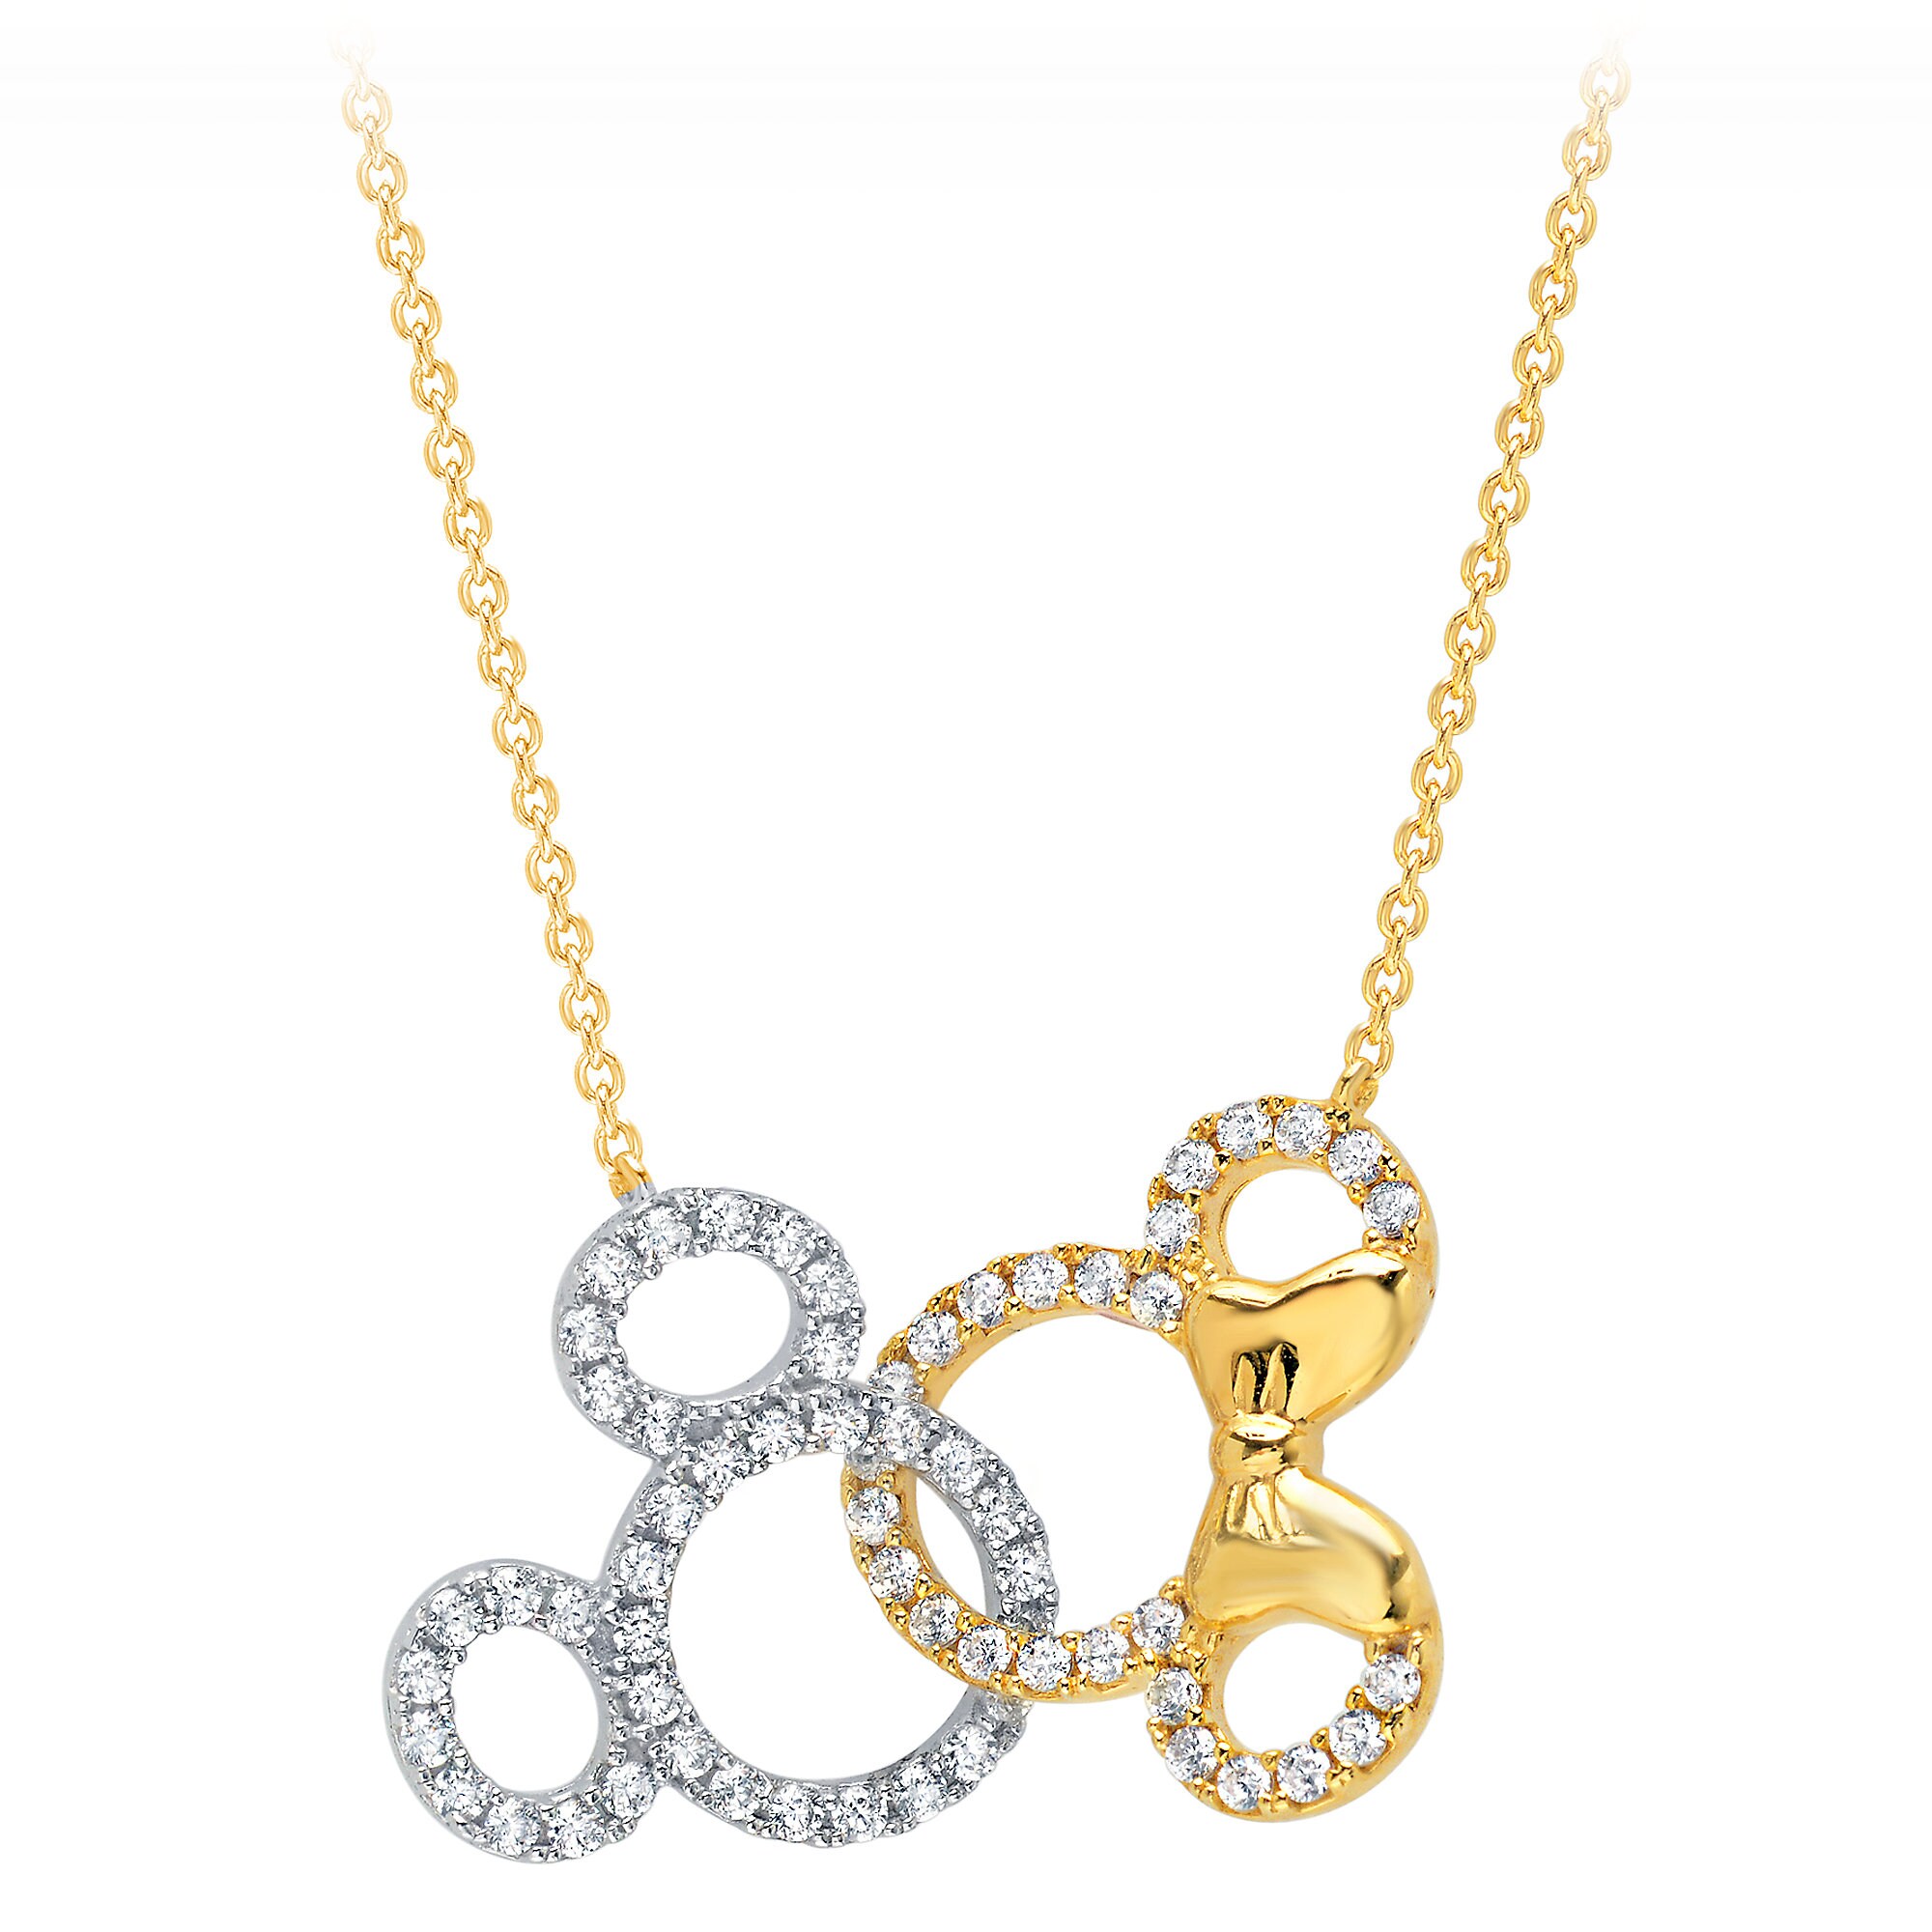 Mickey and Minnie Mouse Interlocking Icons Necklace by CRISLU